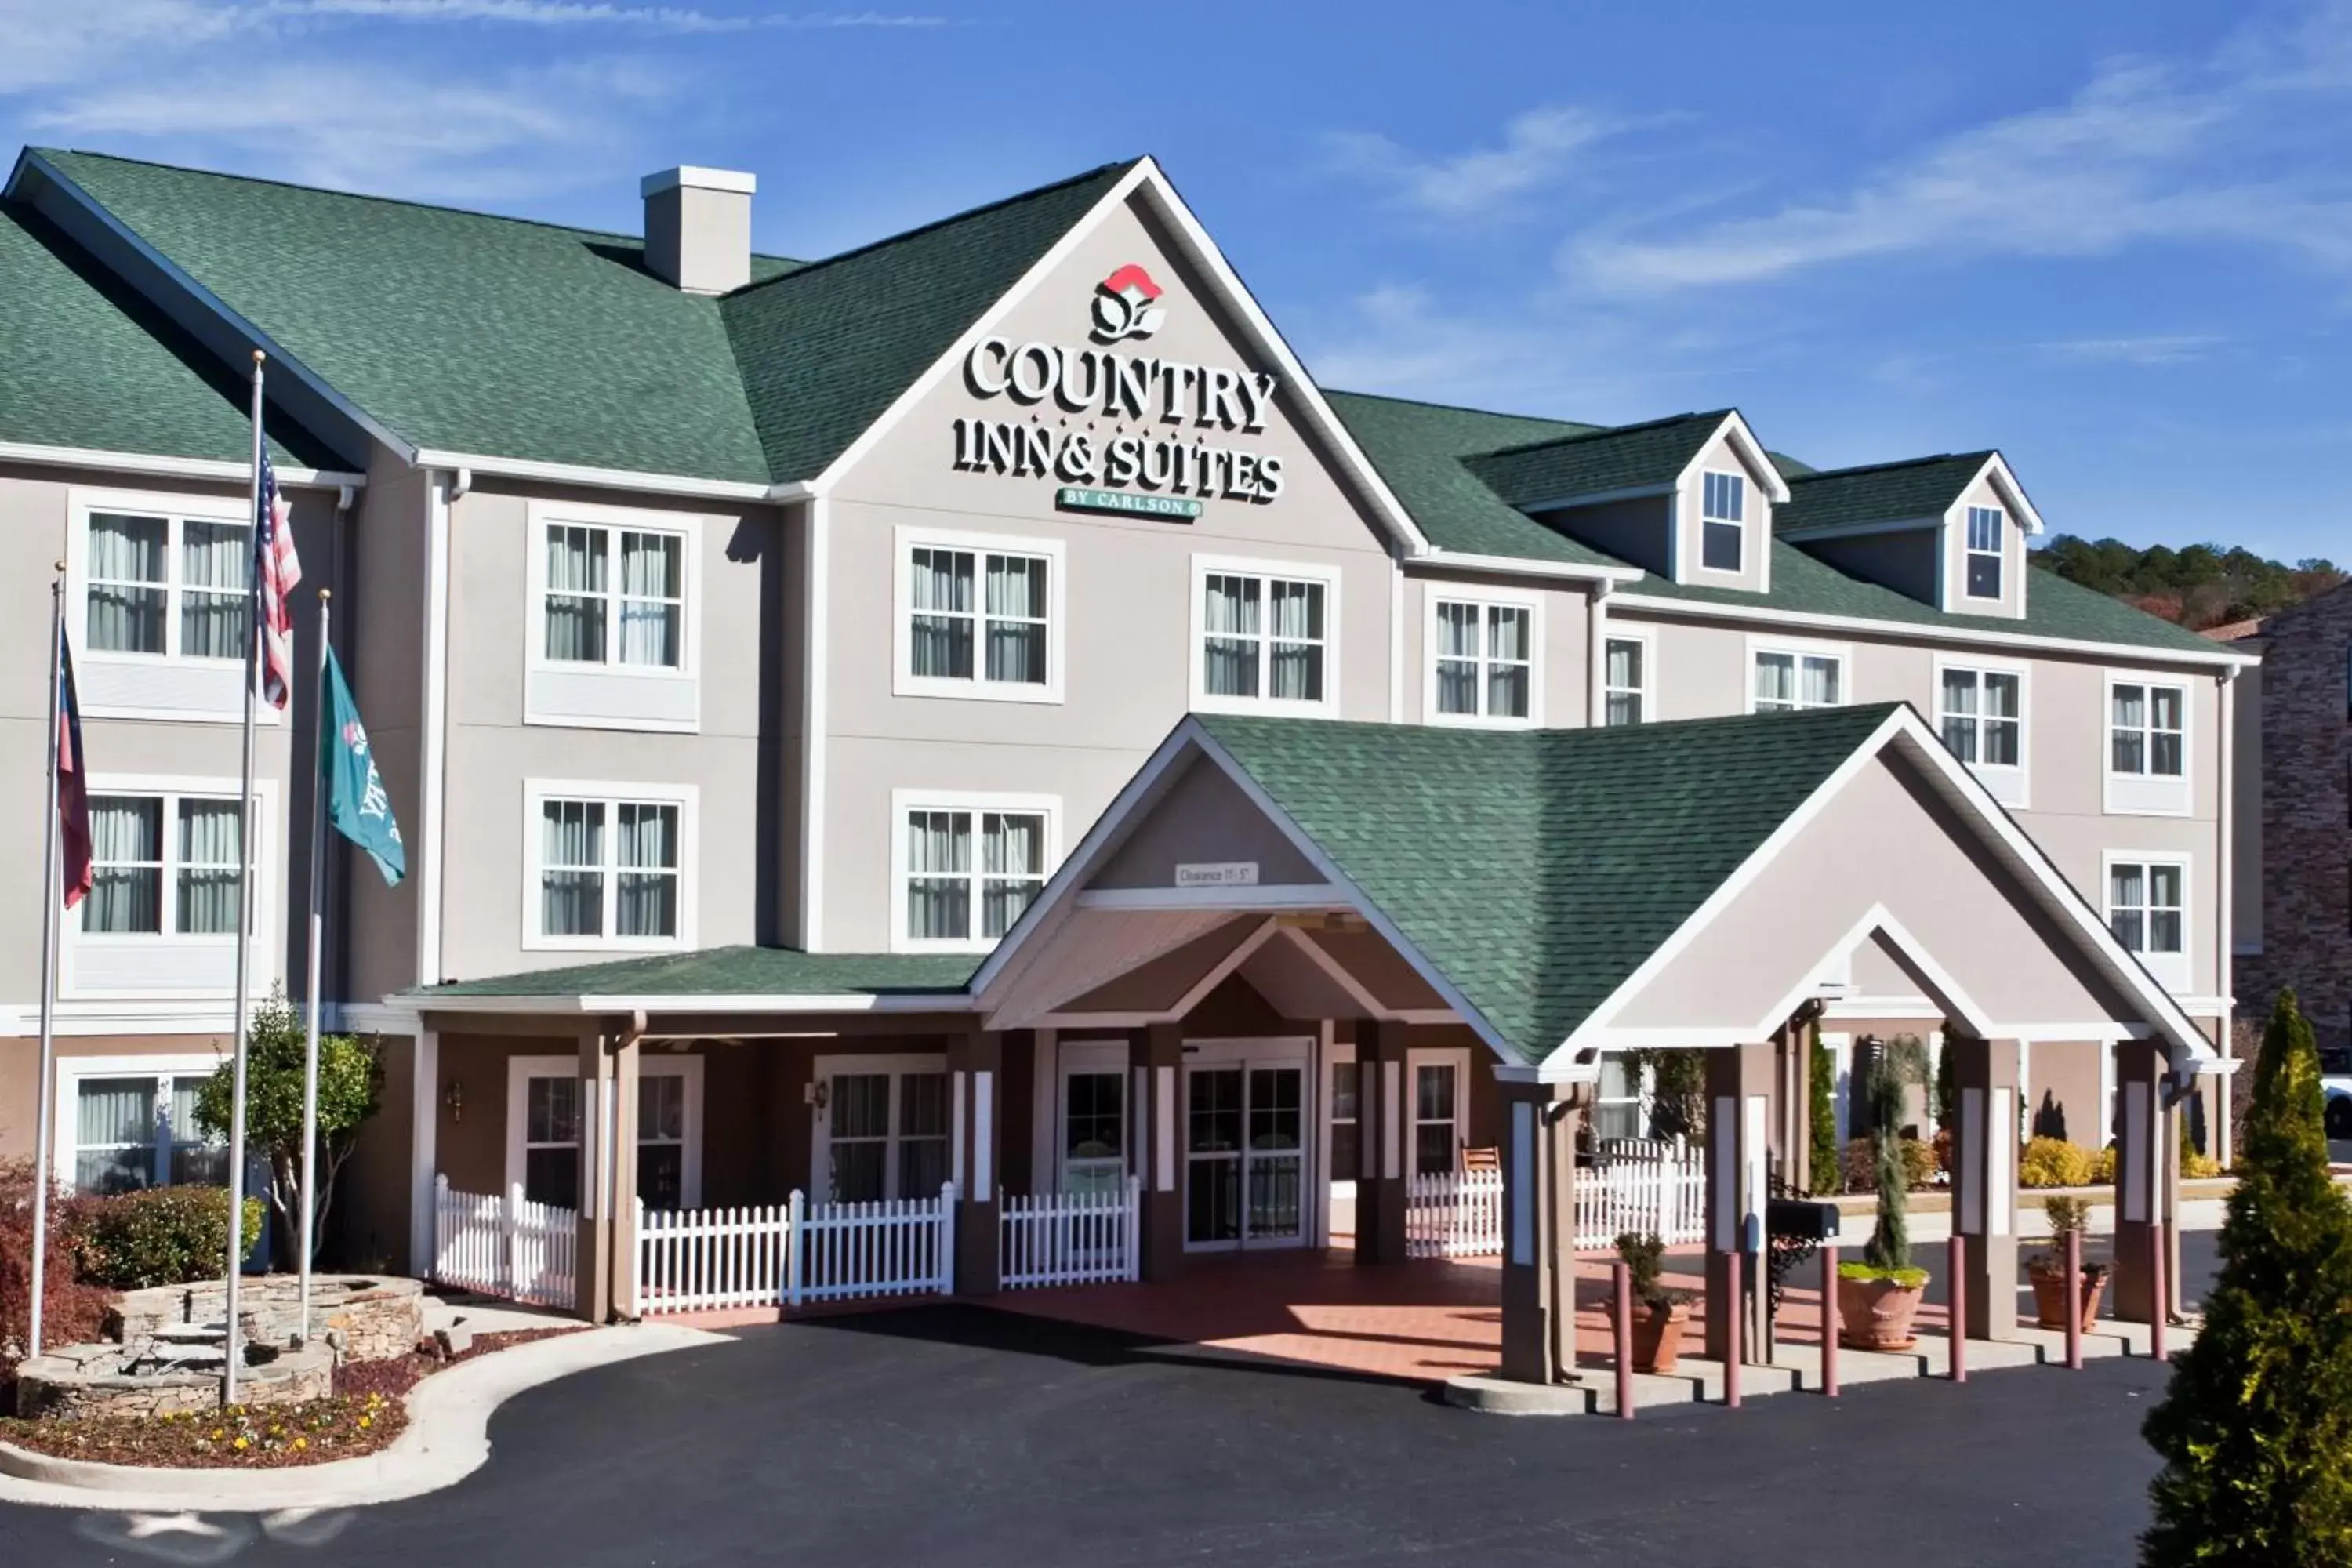 Facade/entrance, Property Building in Country Inn & Suites by Radisson, Rome, GA